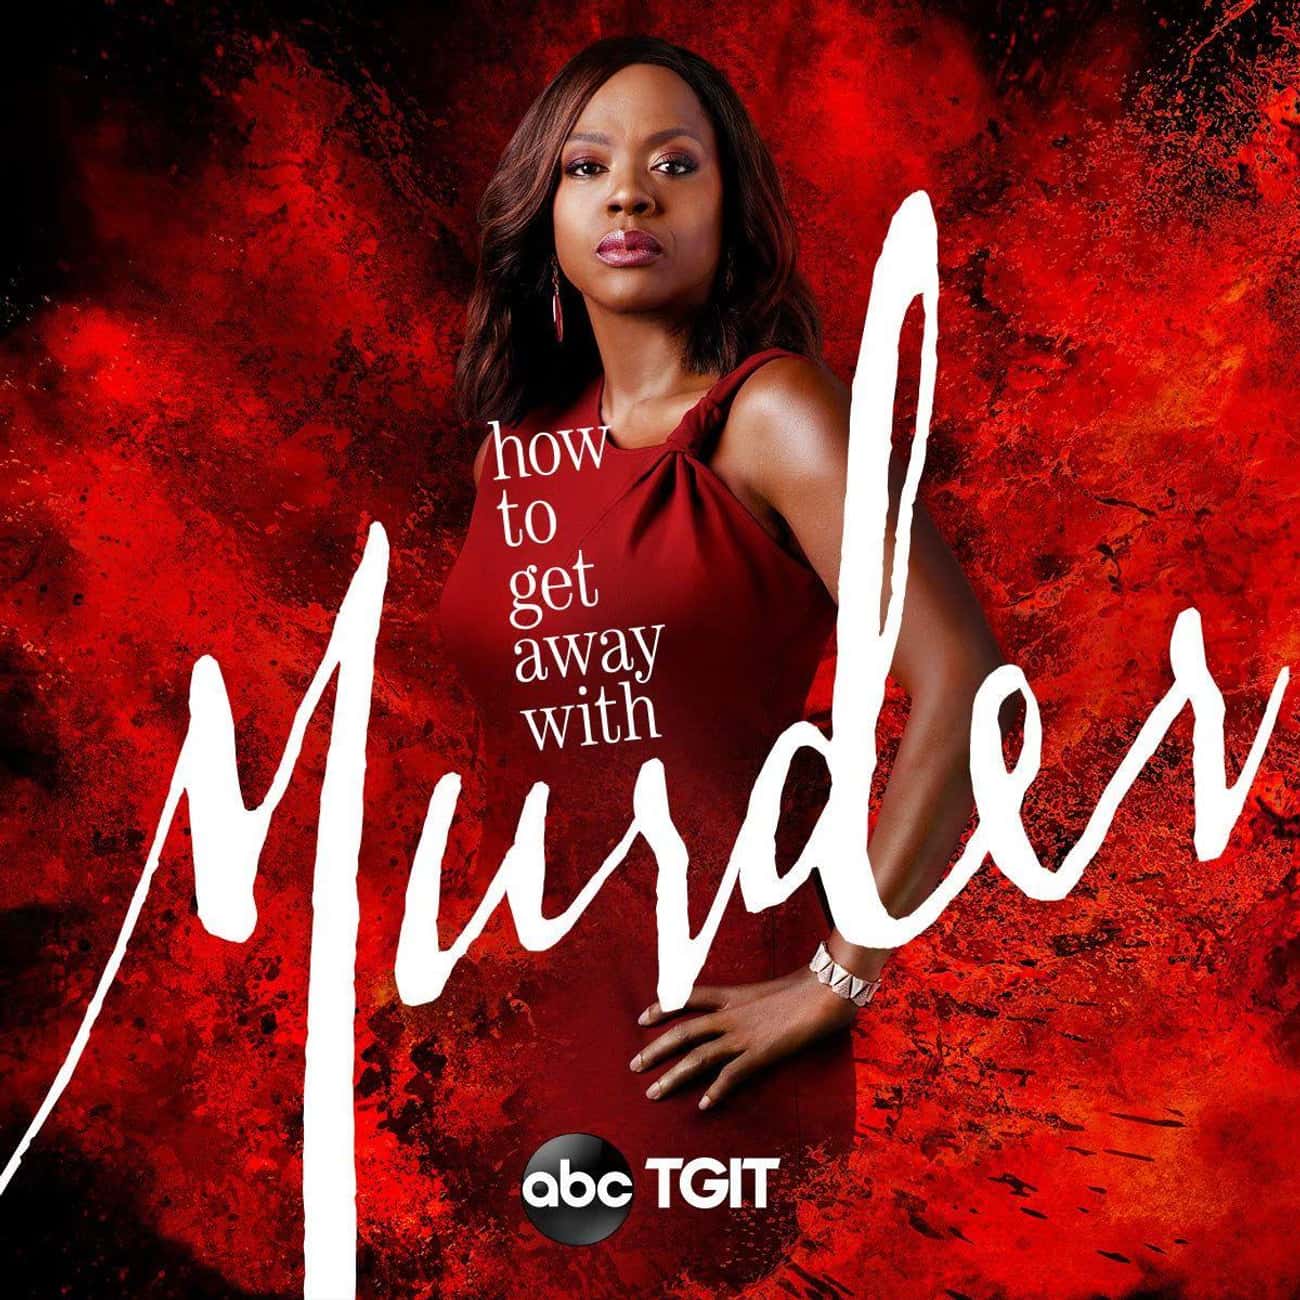 How To Get Away With Murder - Season 5